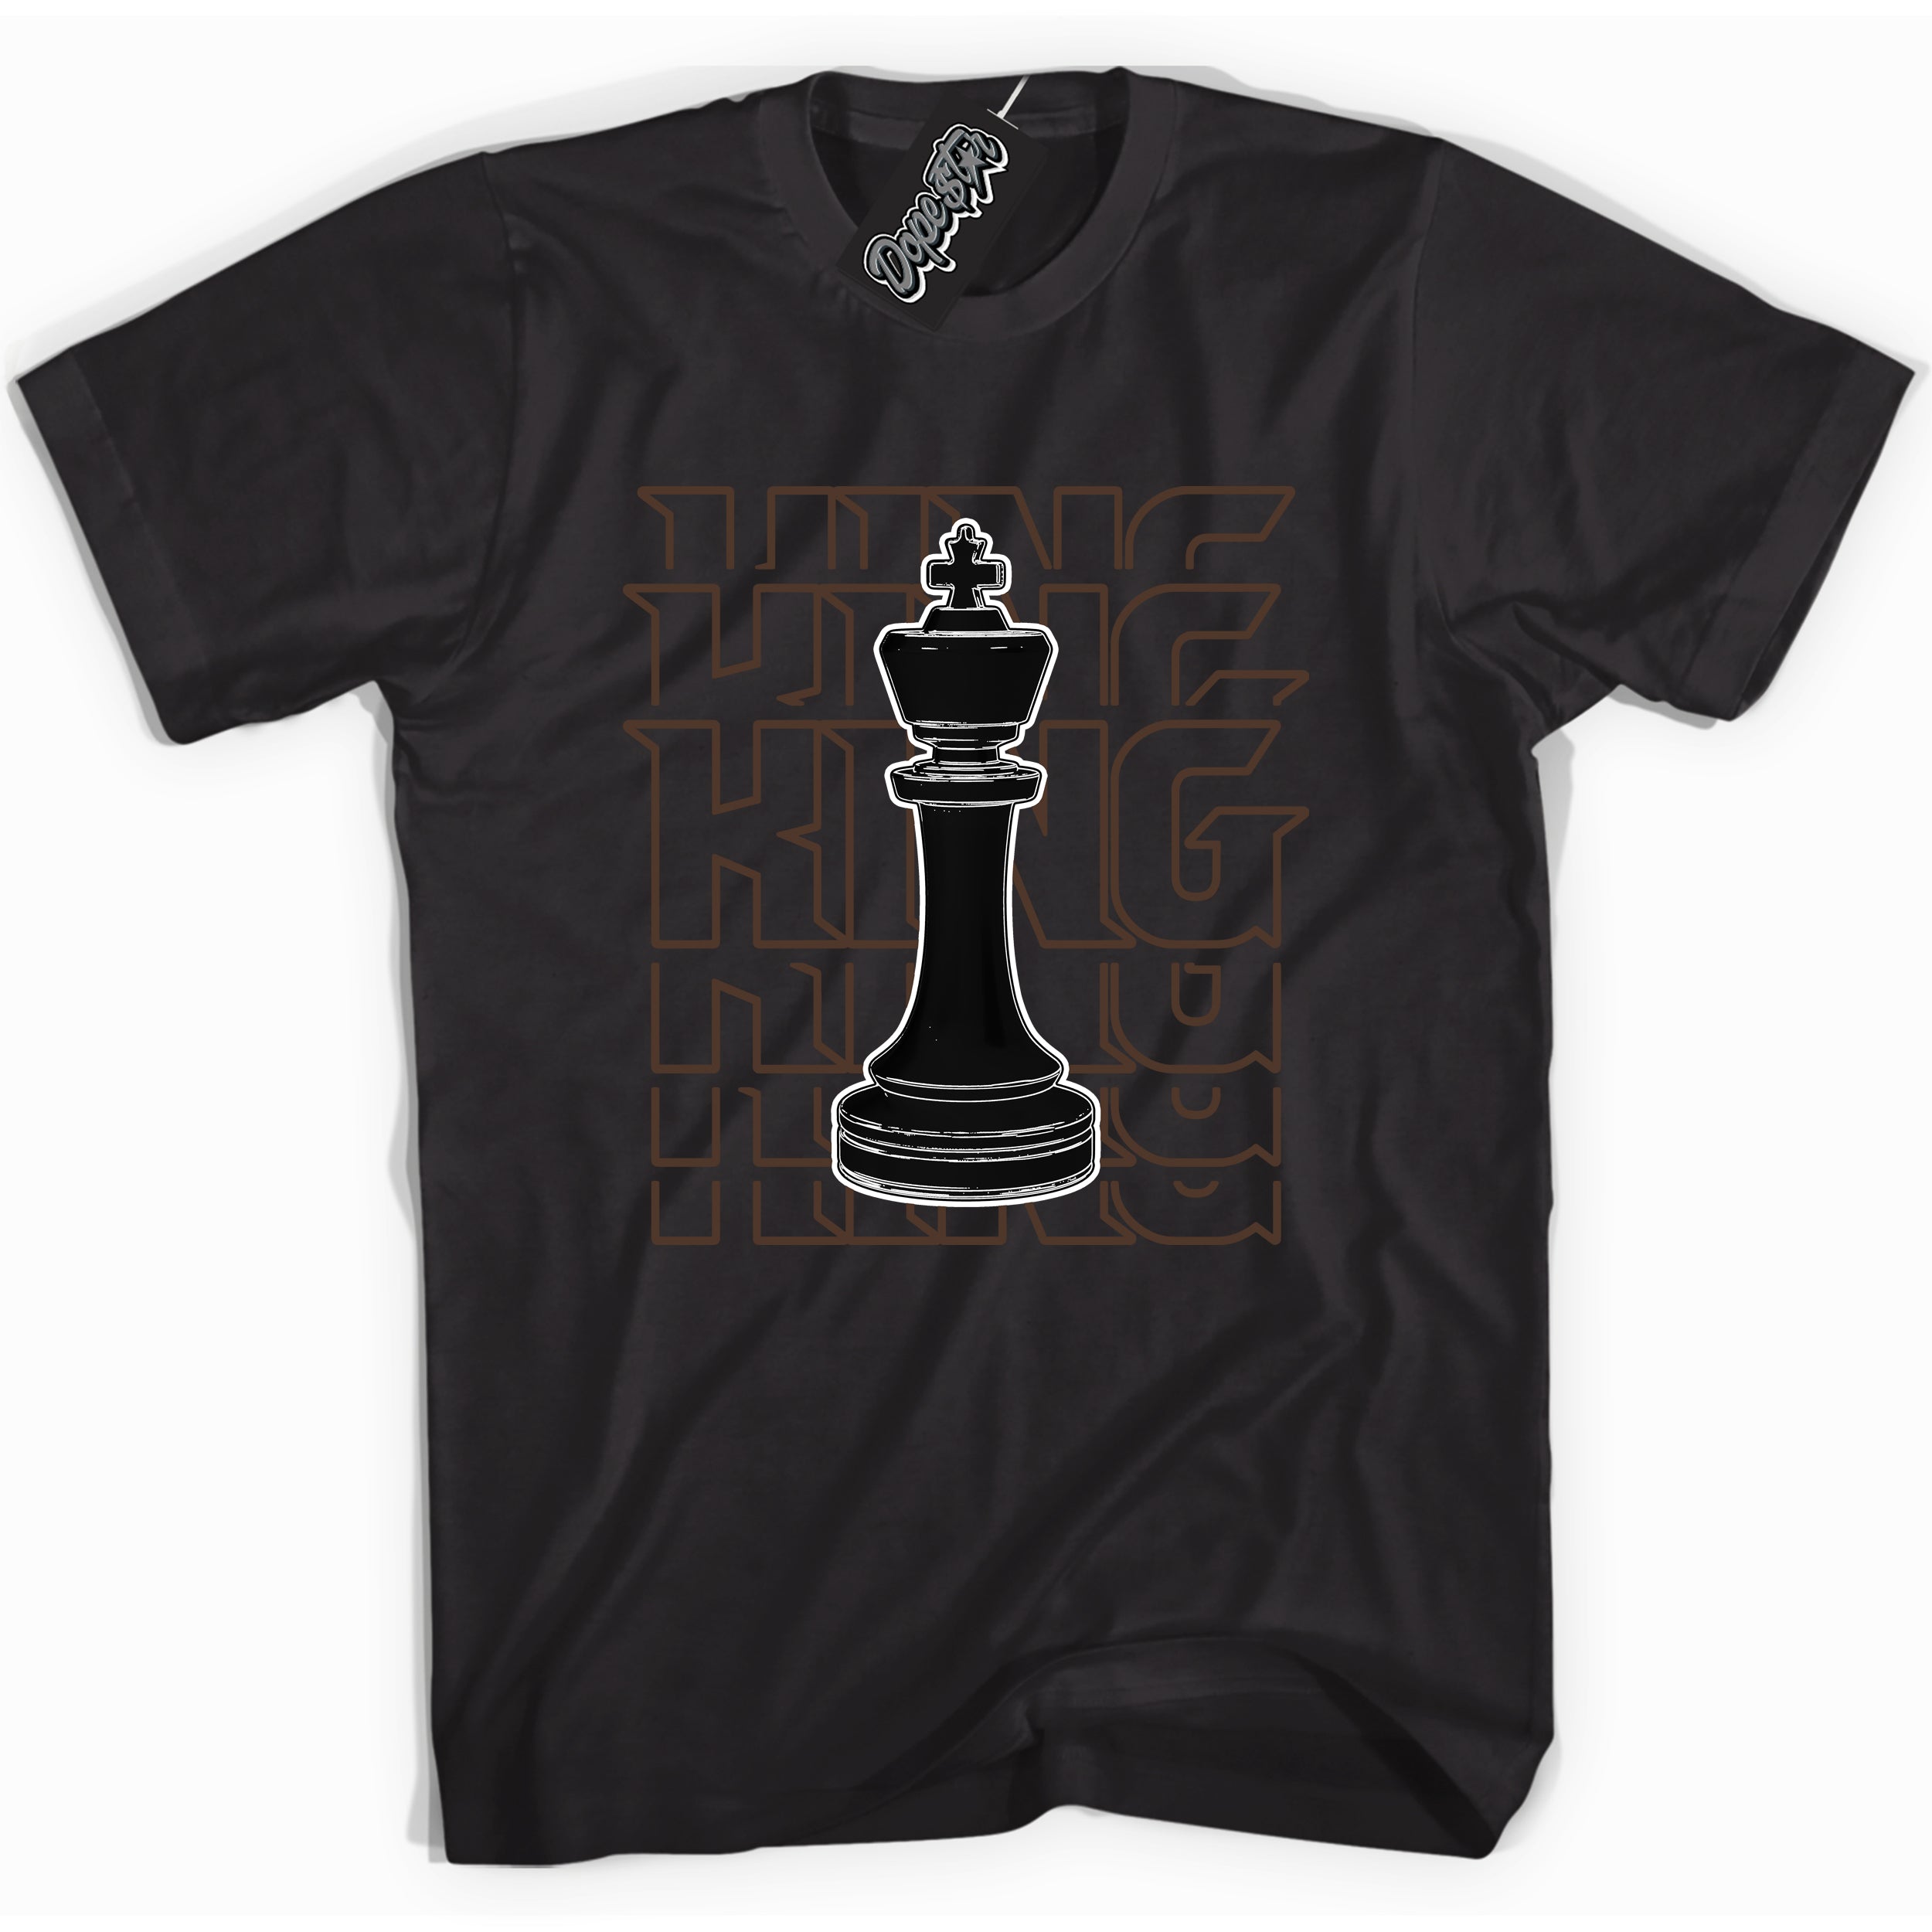 Cool Black graphic tee with “ King Chess ” design, that perfectly matches Palomino 1s sneakers 